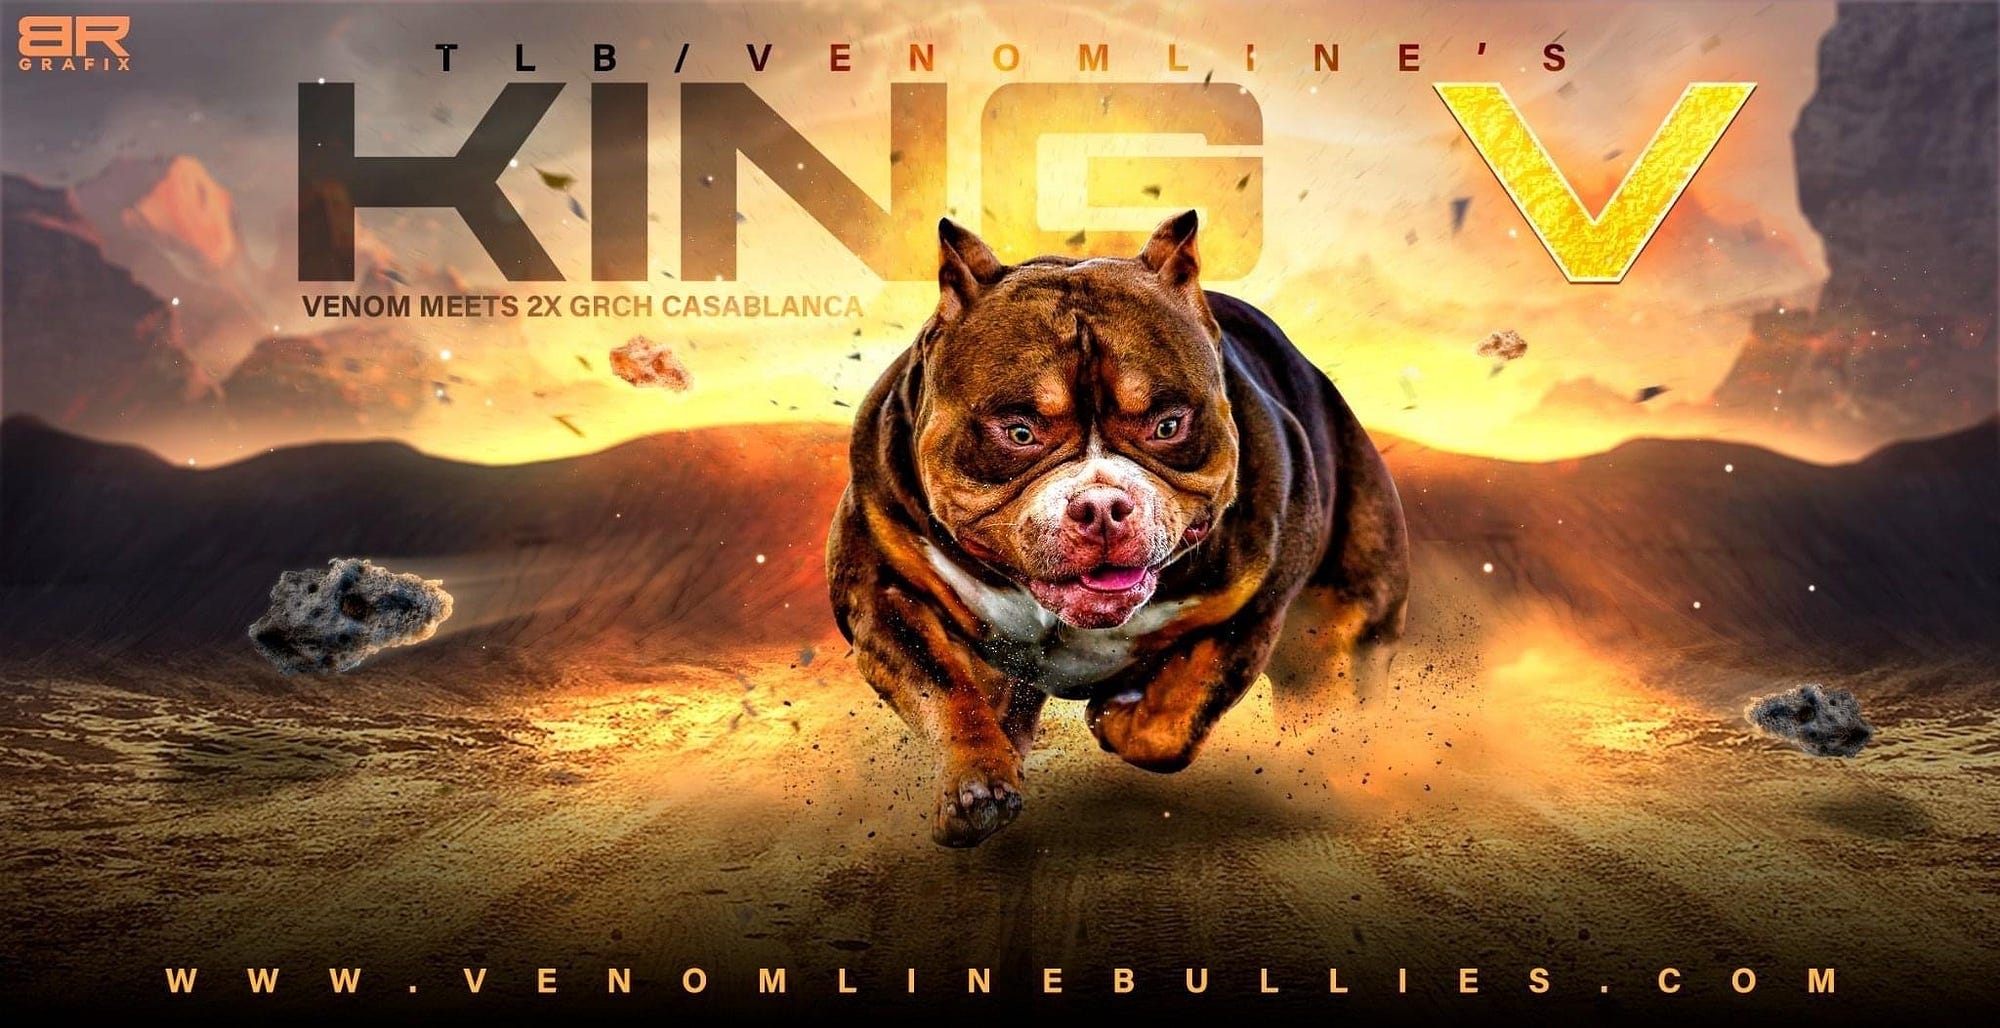 TOP PRODUCING POCKET BULLY STUD, LOUIS V LINE'S VENOM PRODUCTIONS, (UPDATED 2022), by BULLY KING Magazine, BULLY KING Magazine